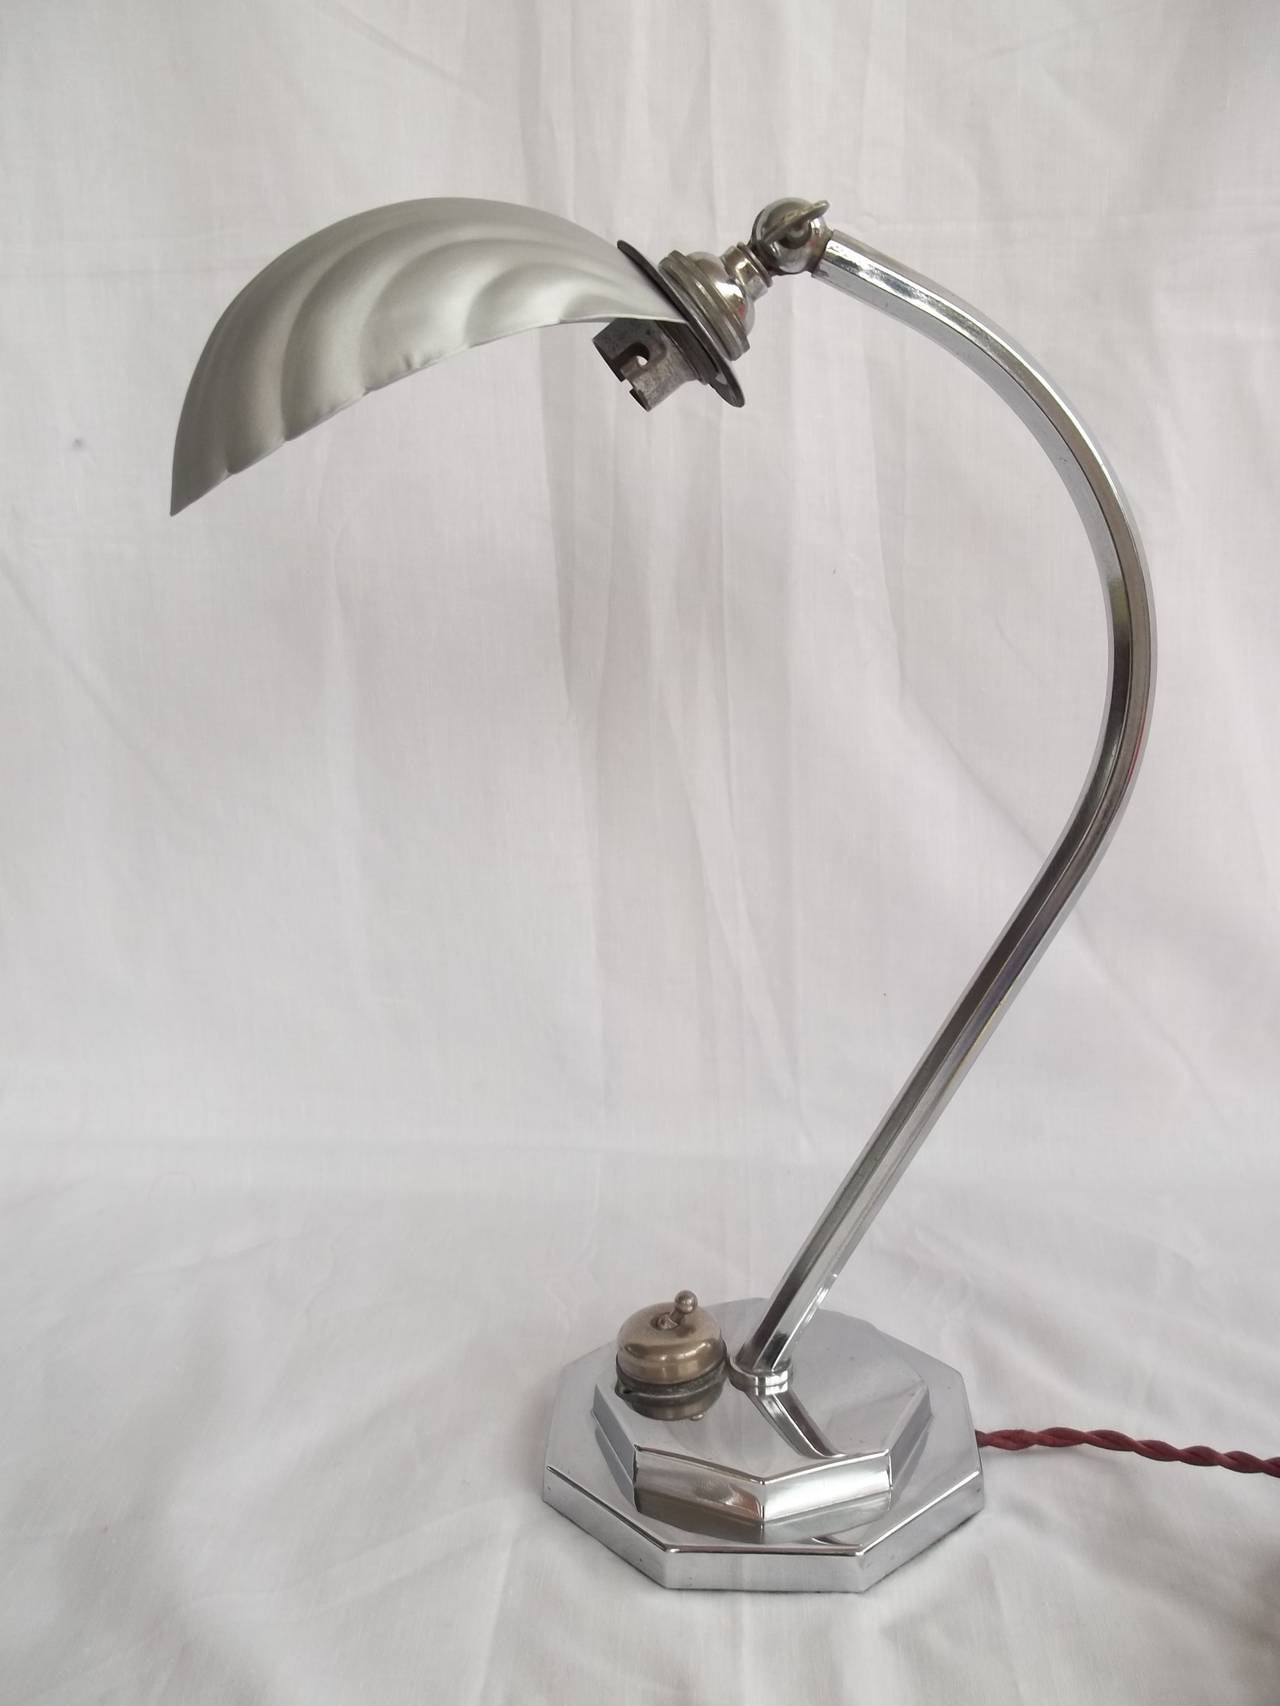 This is a very good and original desk or table lamp from the Art Deco period, circa 1920s

It is all original and has the classic geometric design features typified by the Art Deco period. 

The base has two chromed octagonal sections, one atop the